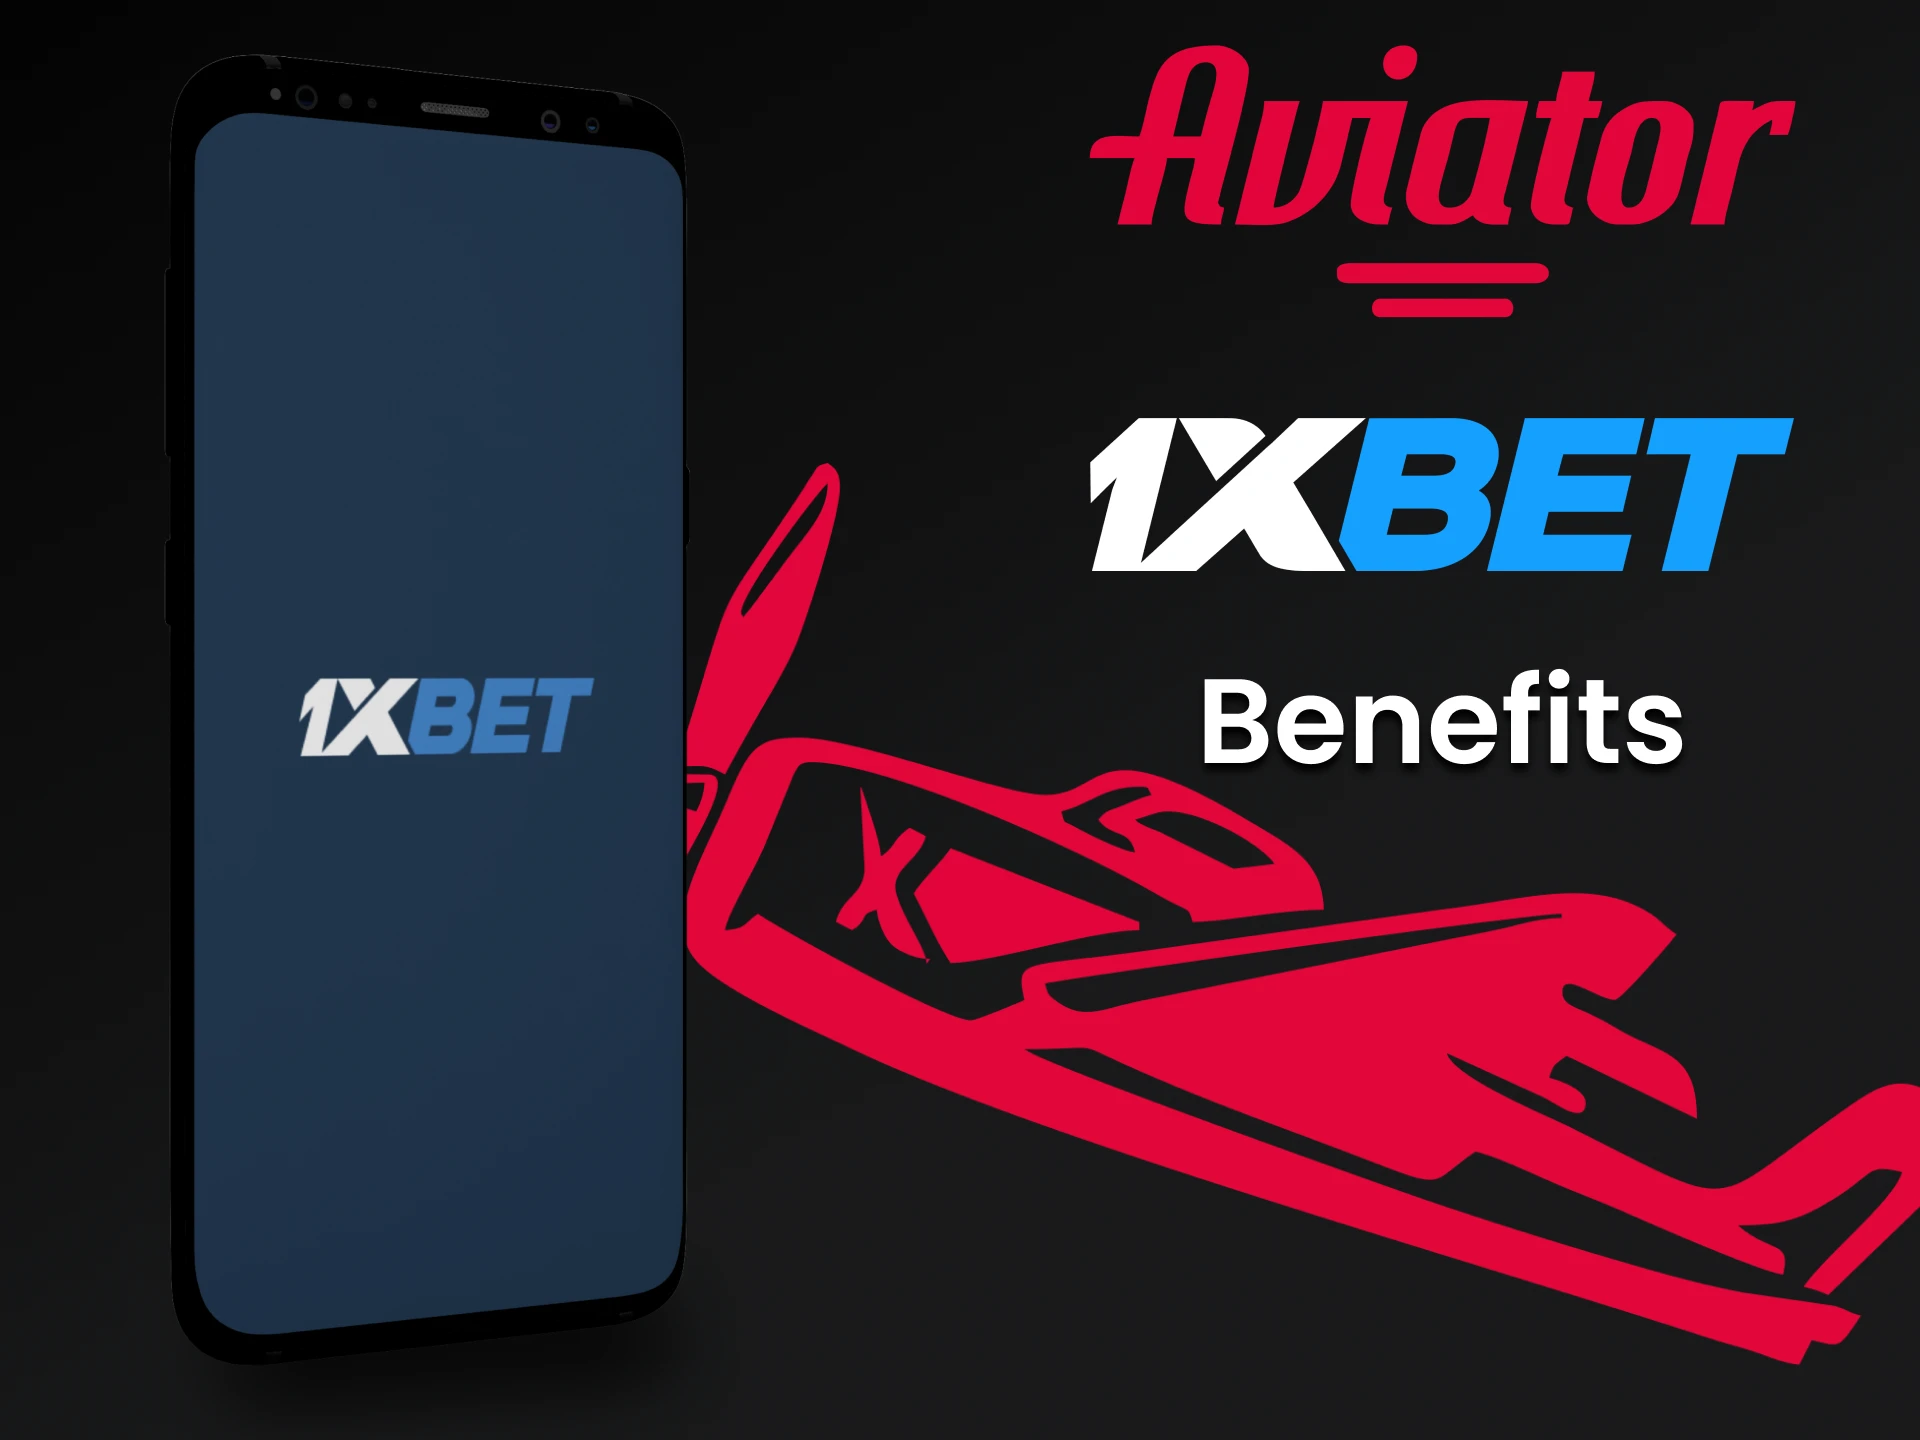 Aviator from 1xbet is the right choice.